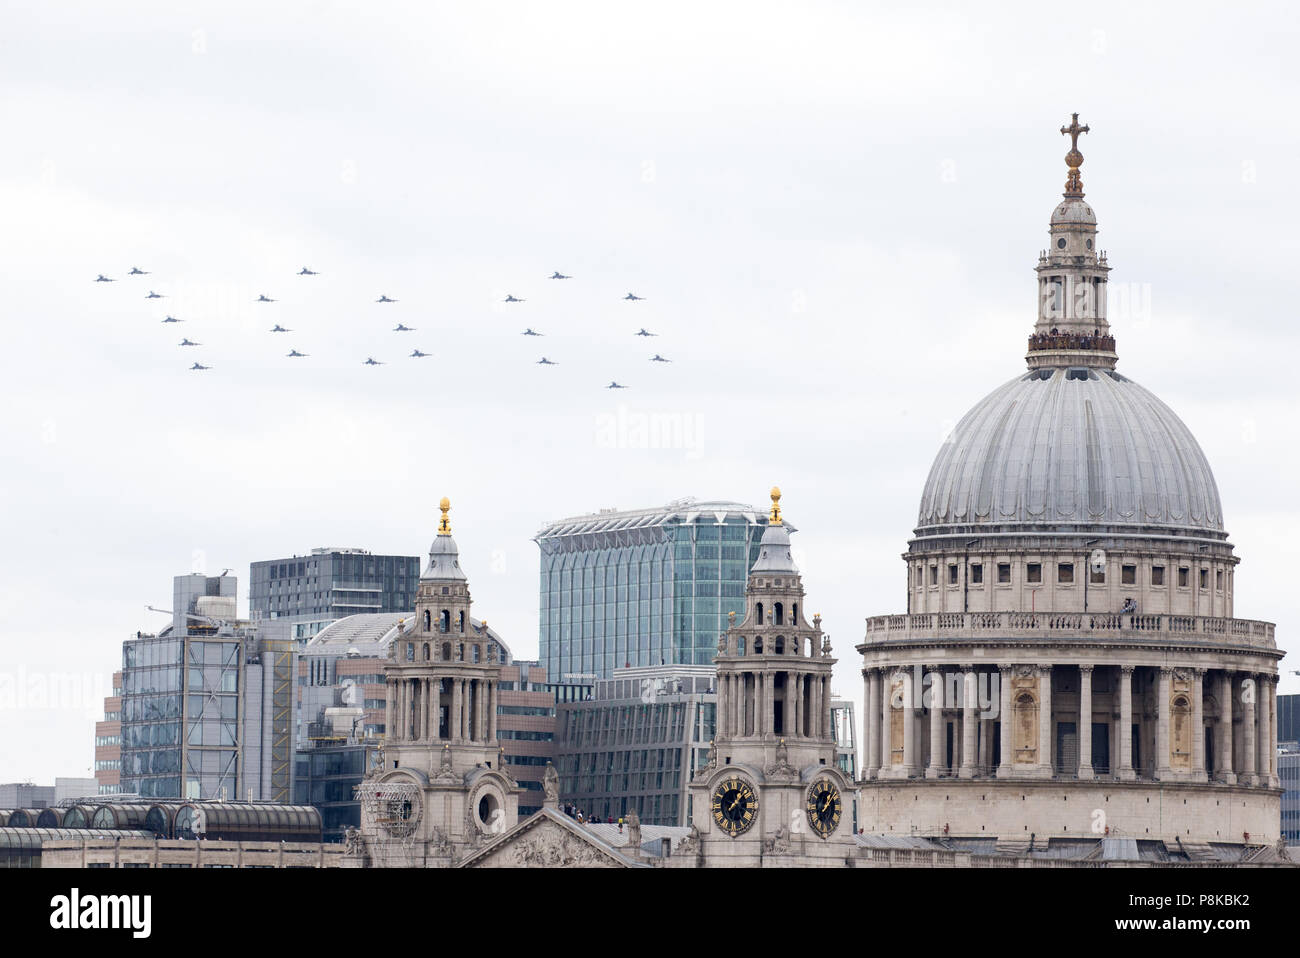 22 Typhoon Jets spell 100 as they fly past St Paul's Cathedral in London to commemorate 100 years and 100 Days since the first World War ended Stock Photo